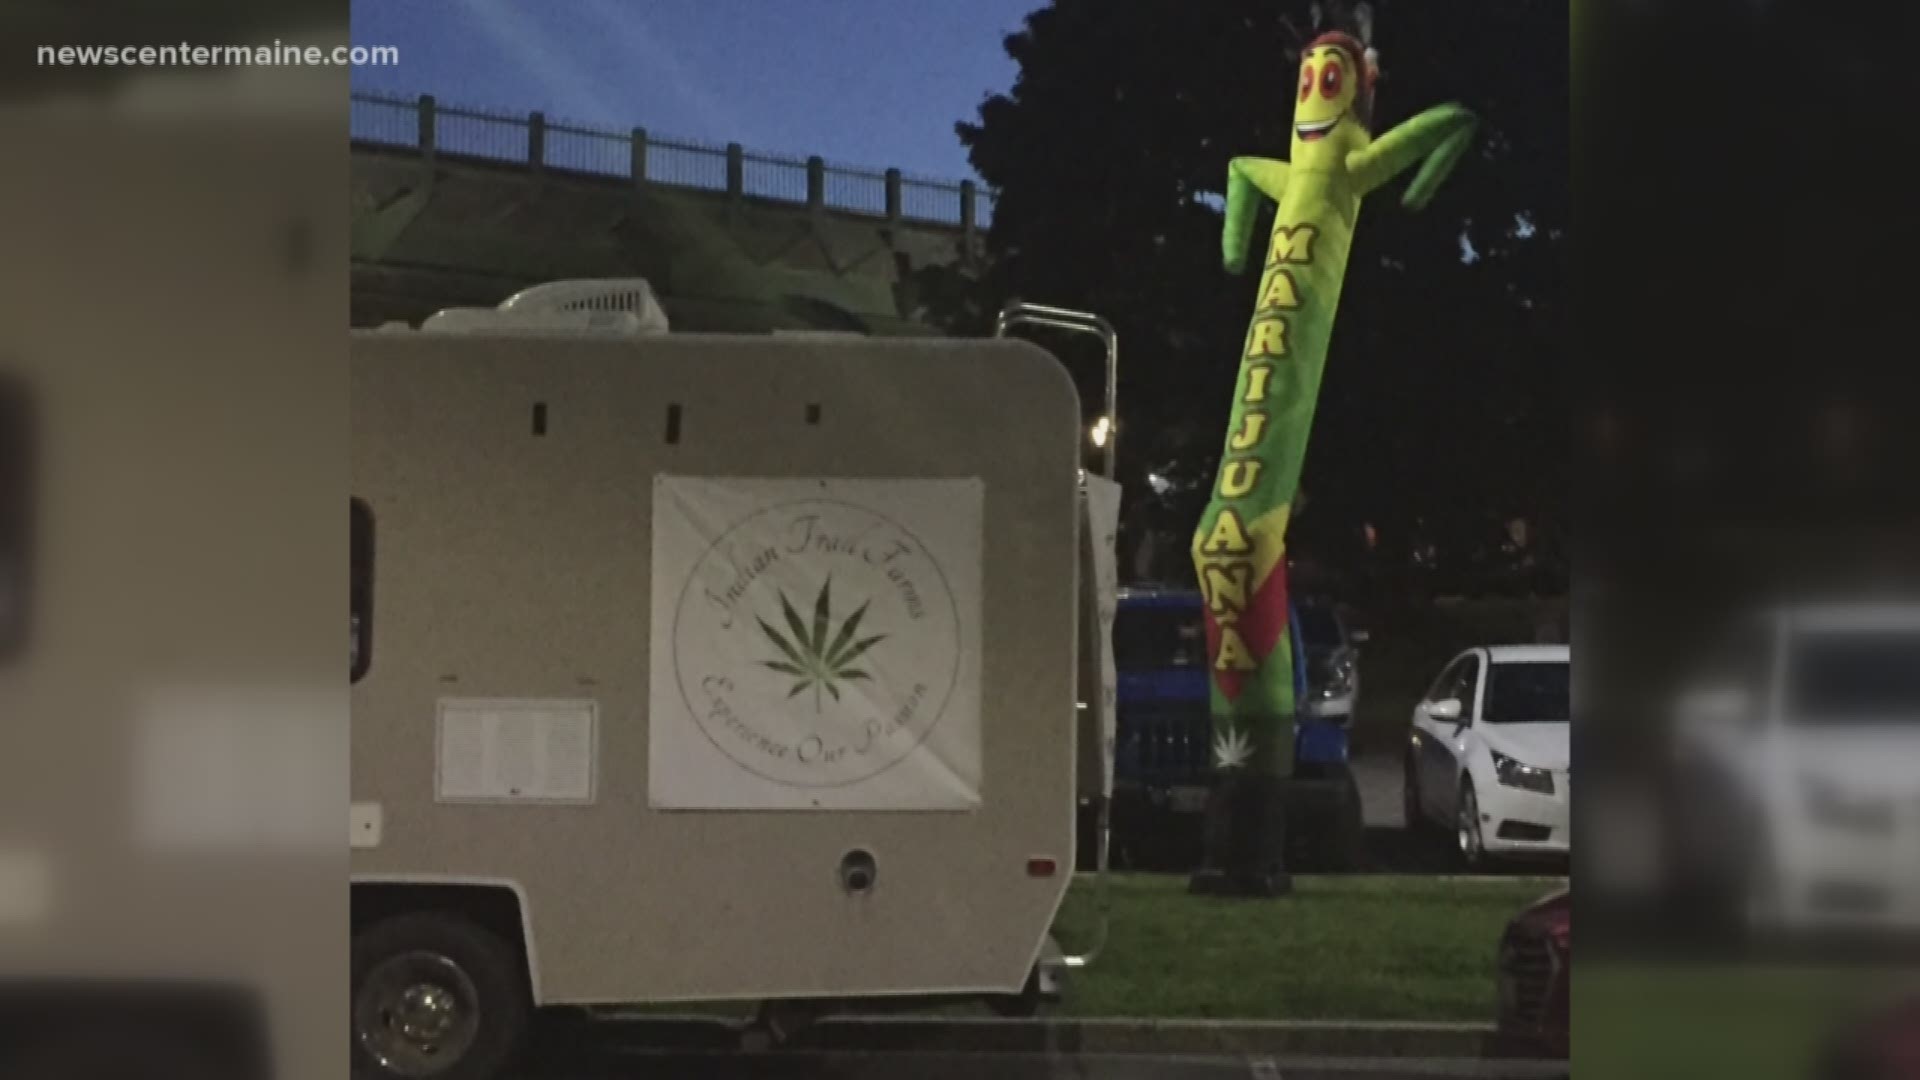 A man from Machias has been taking advantage of Bangor's retail marijuana rules by selling medical marijuana out of a van.